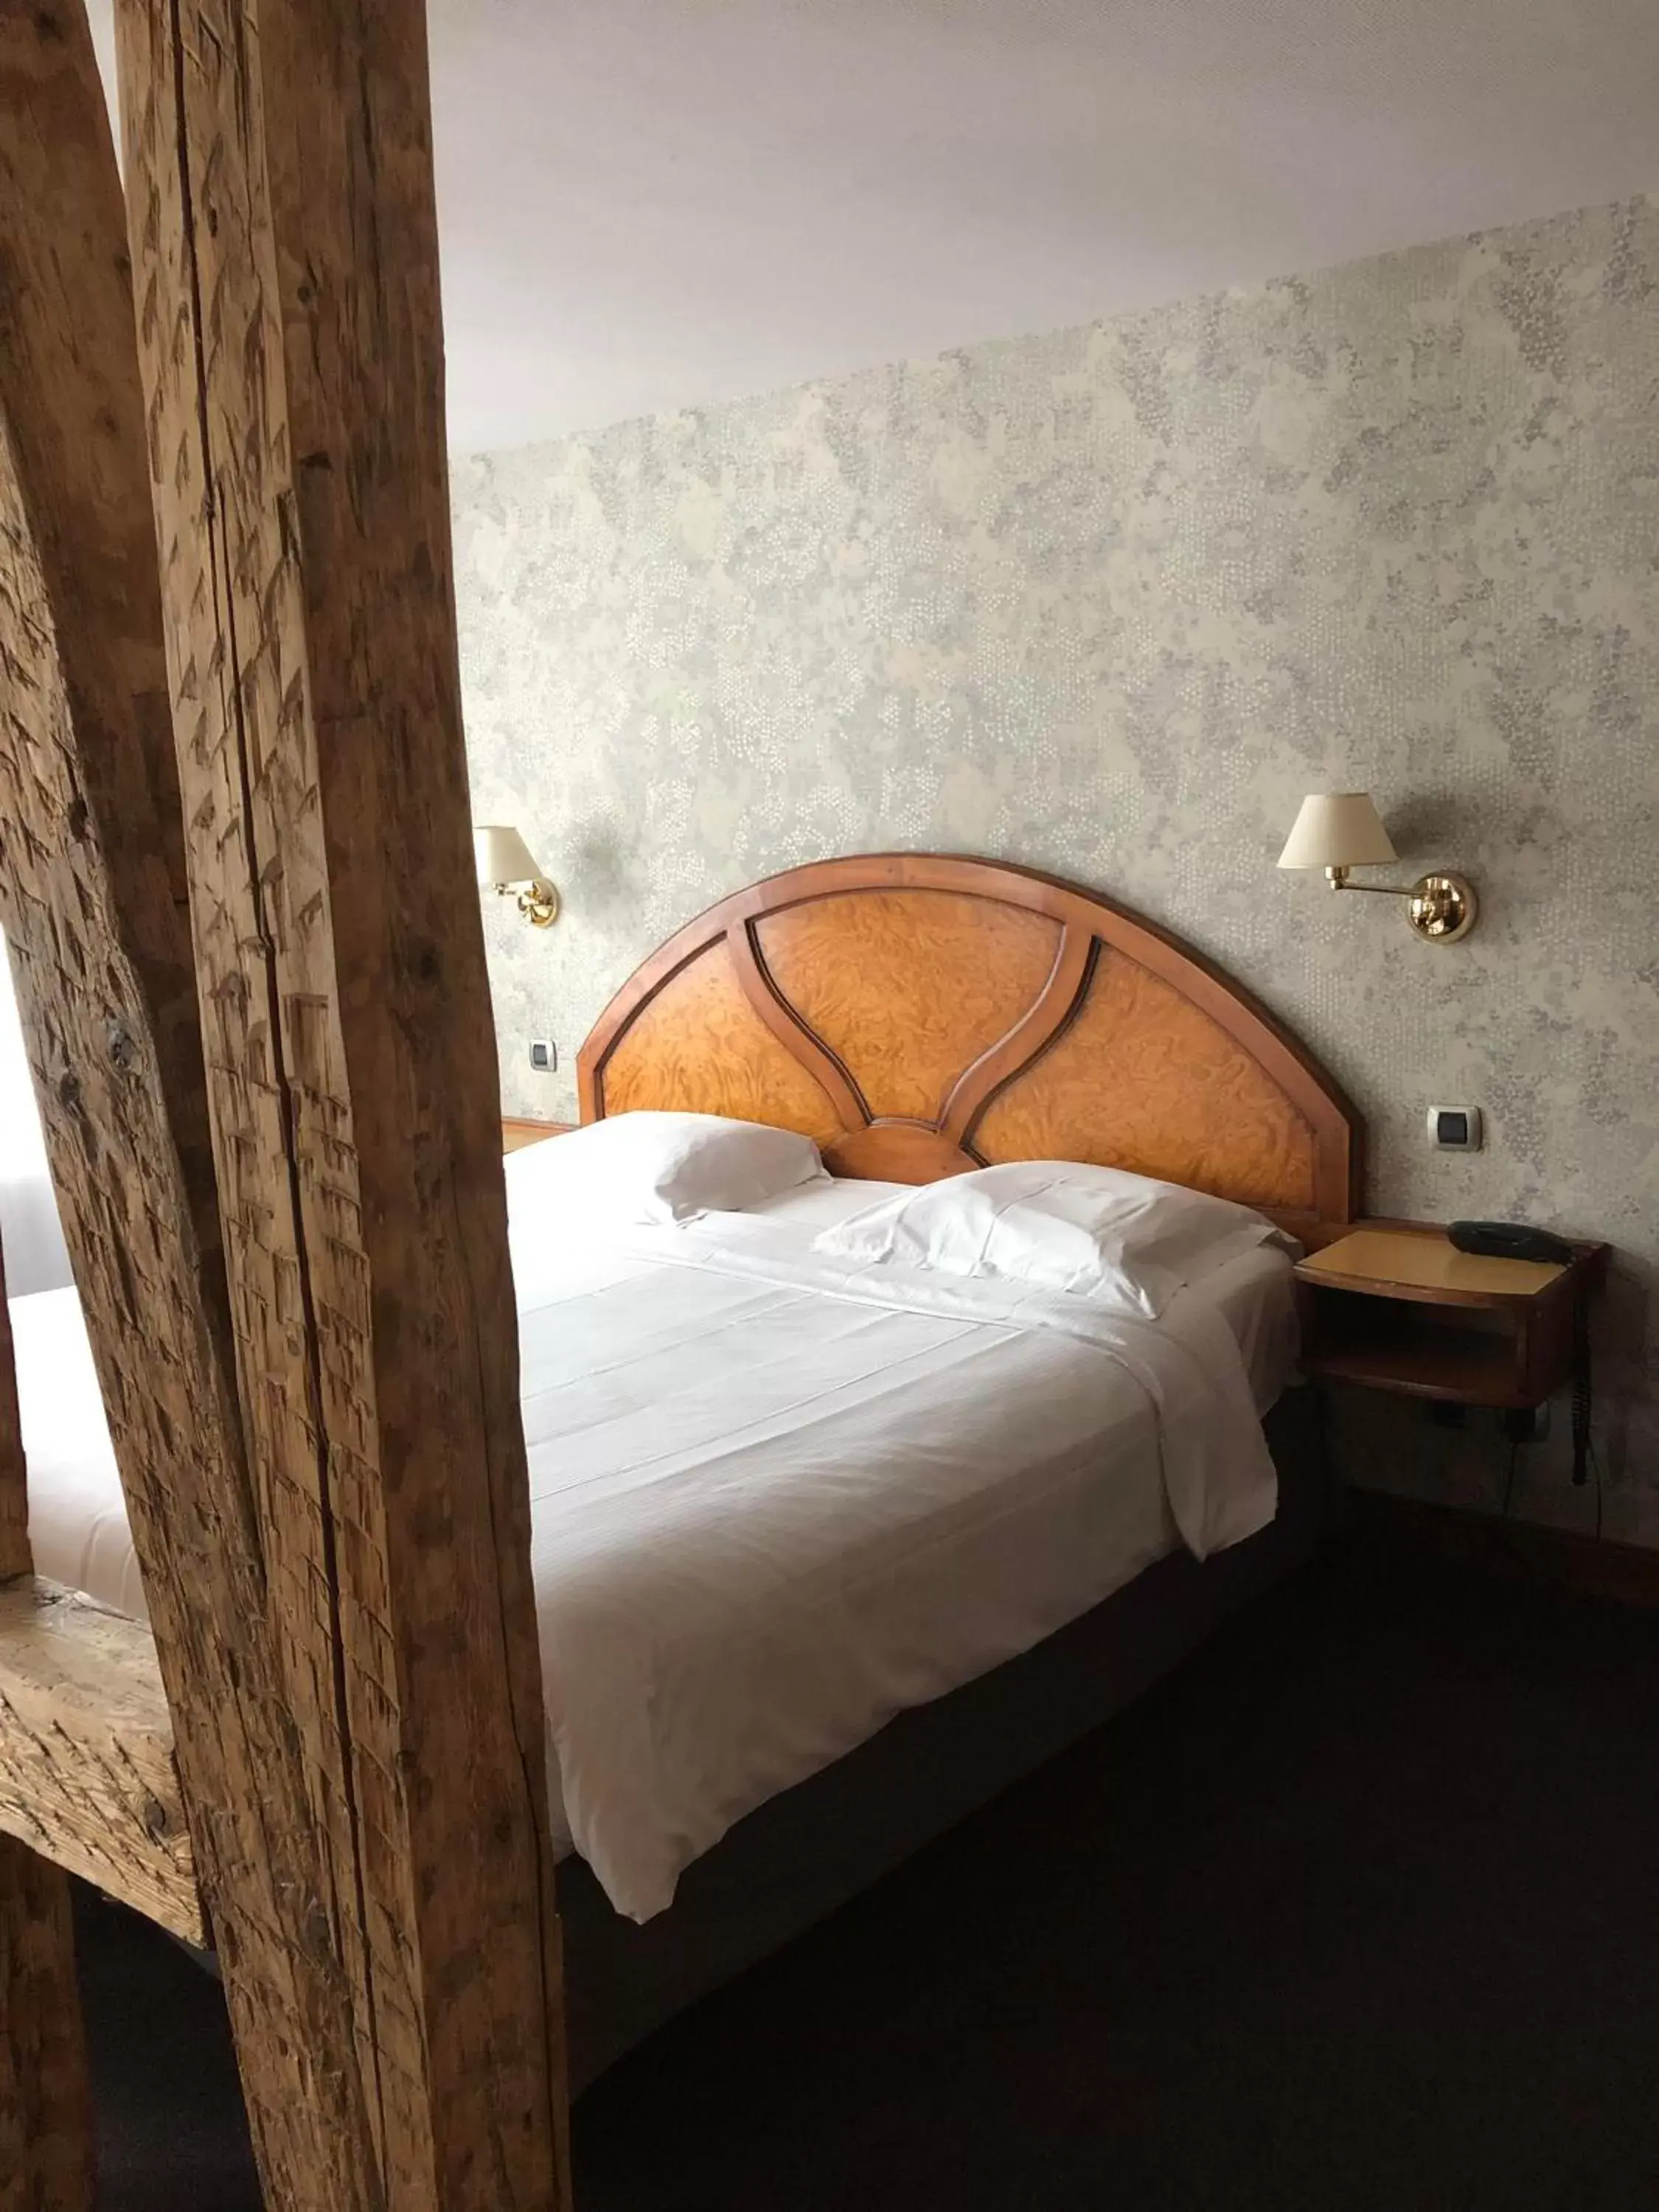 Property building, Room Photo in Hotel Restaurant Au Cerf d'Or